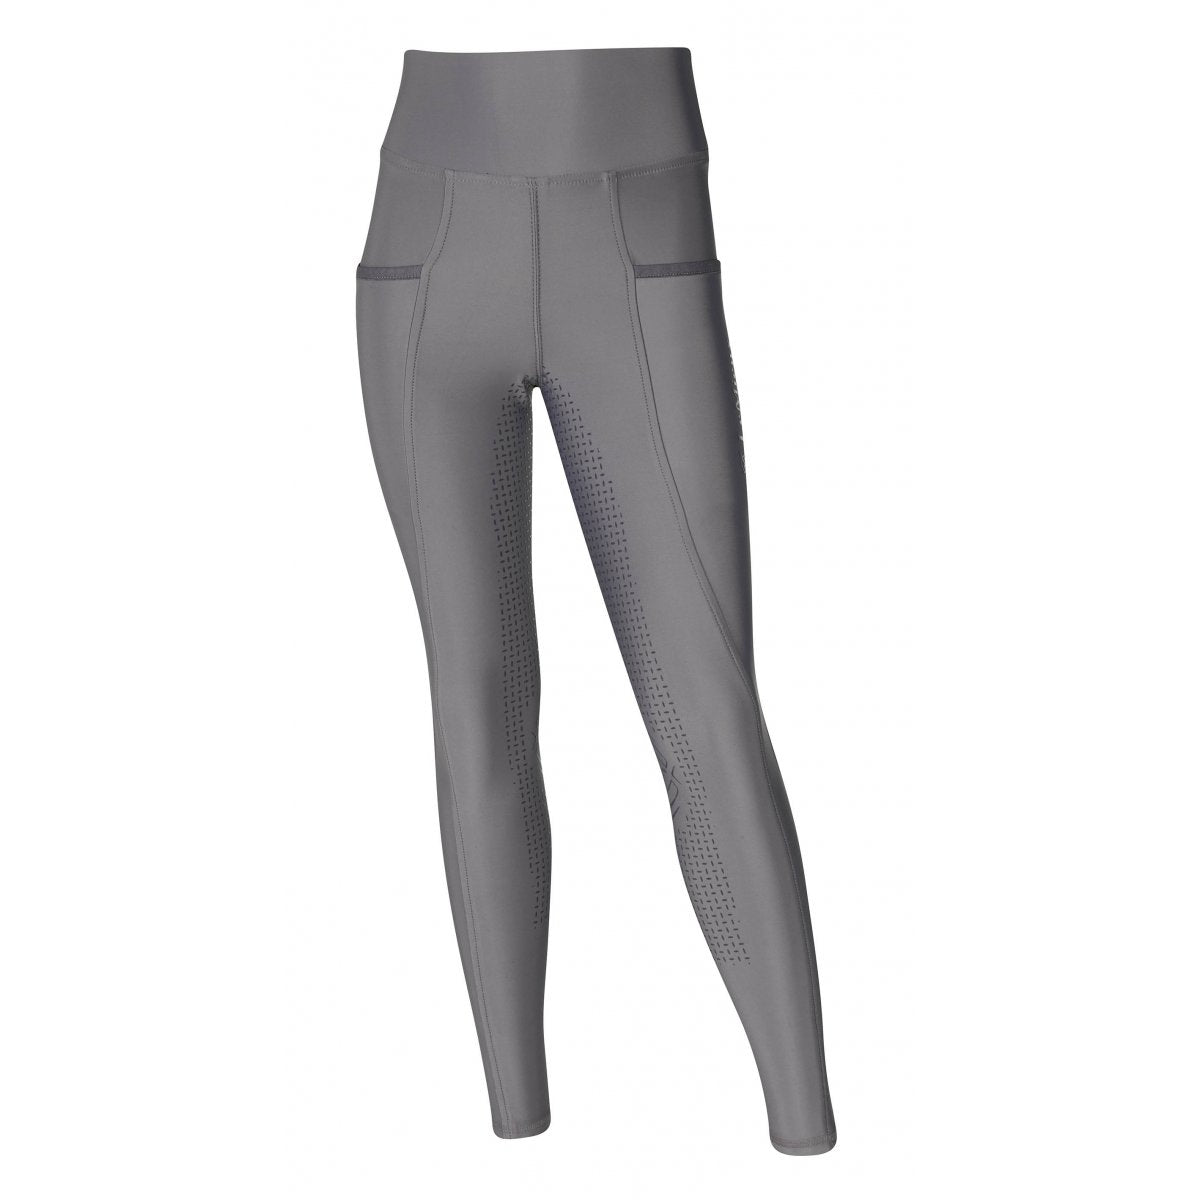 Grey Horse Riding Tights with pockets and perforated leg details.